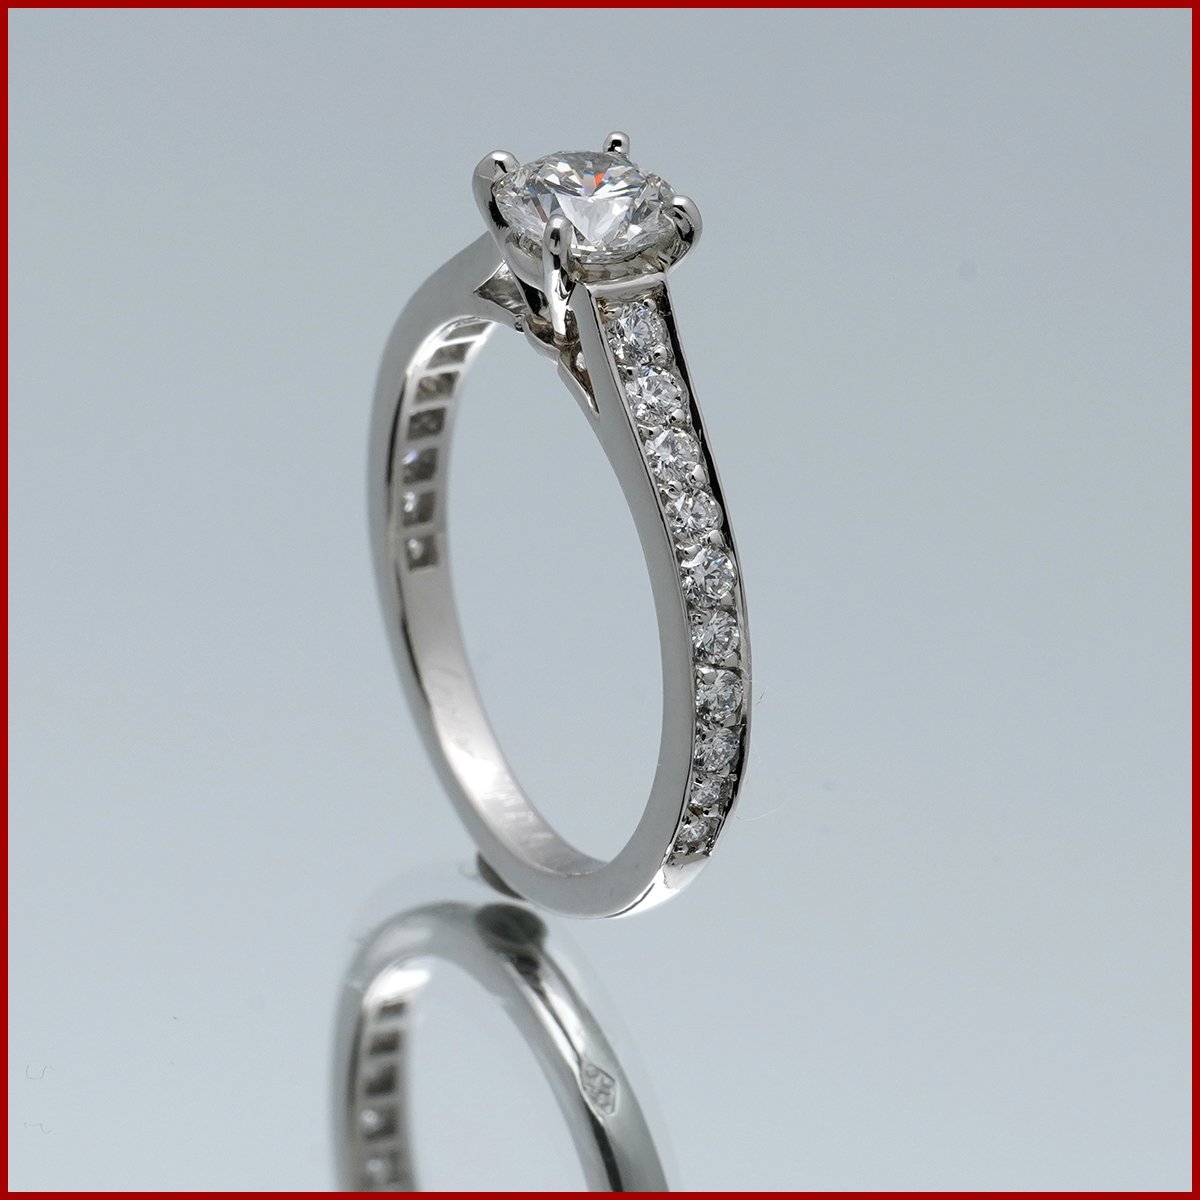  Cartier 1895 sleigh tail half diamond ring ring Pt950 platinum 0.43ct G-VVS2-VG 47 7 number beautiful goods new goods finishing settled guarantee &GIA expert evidence equipped 